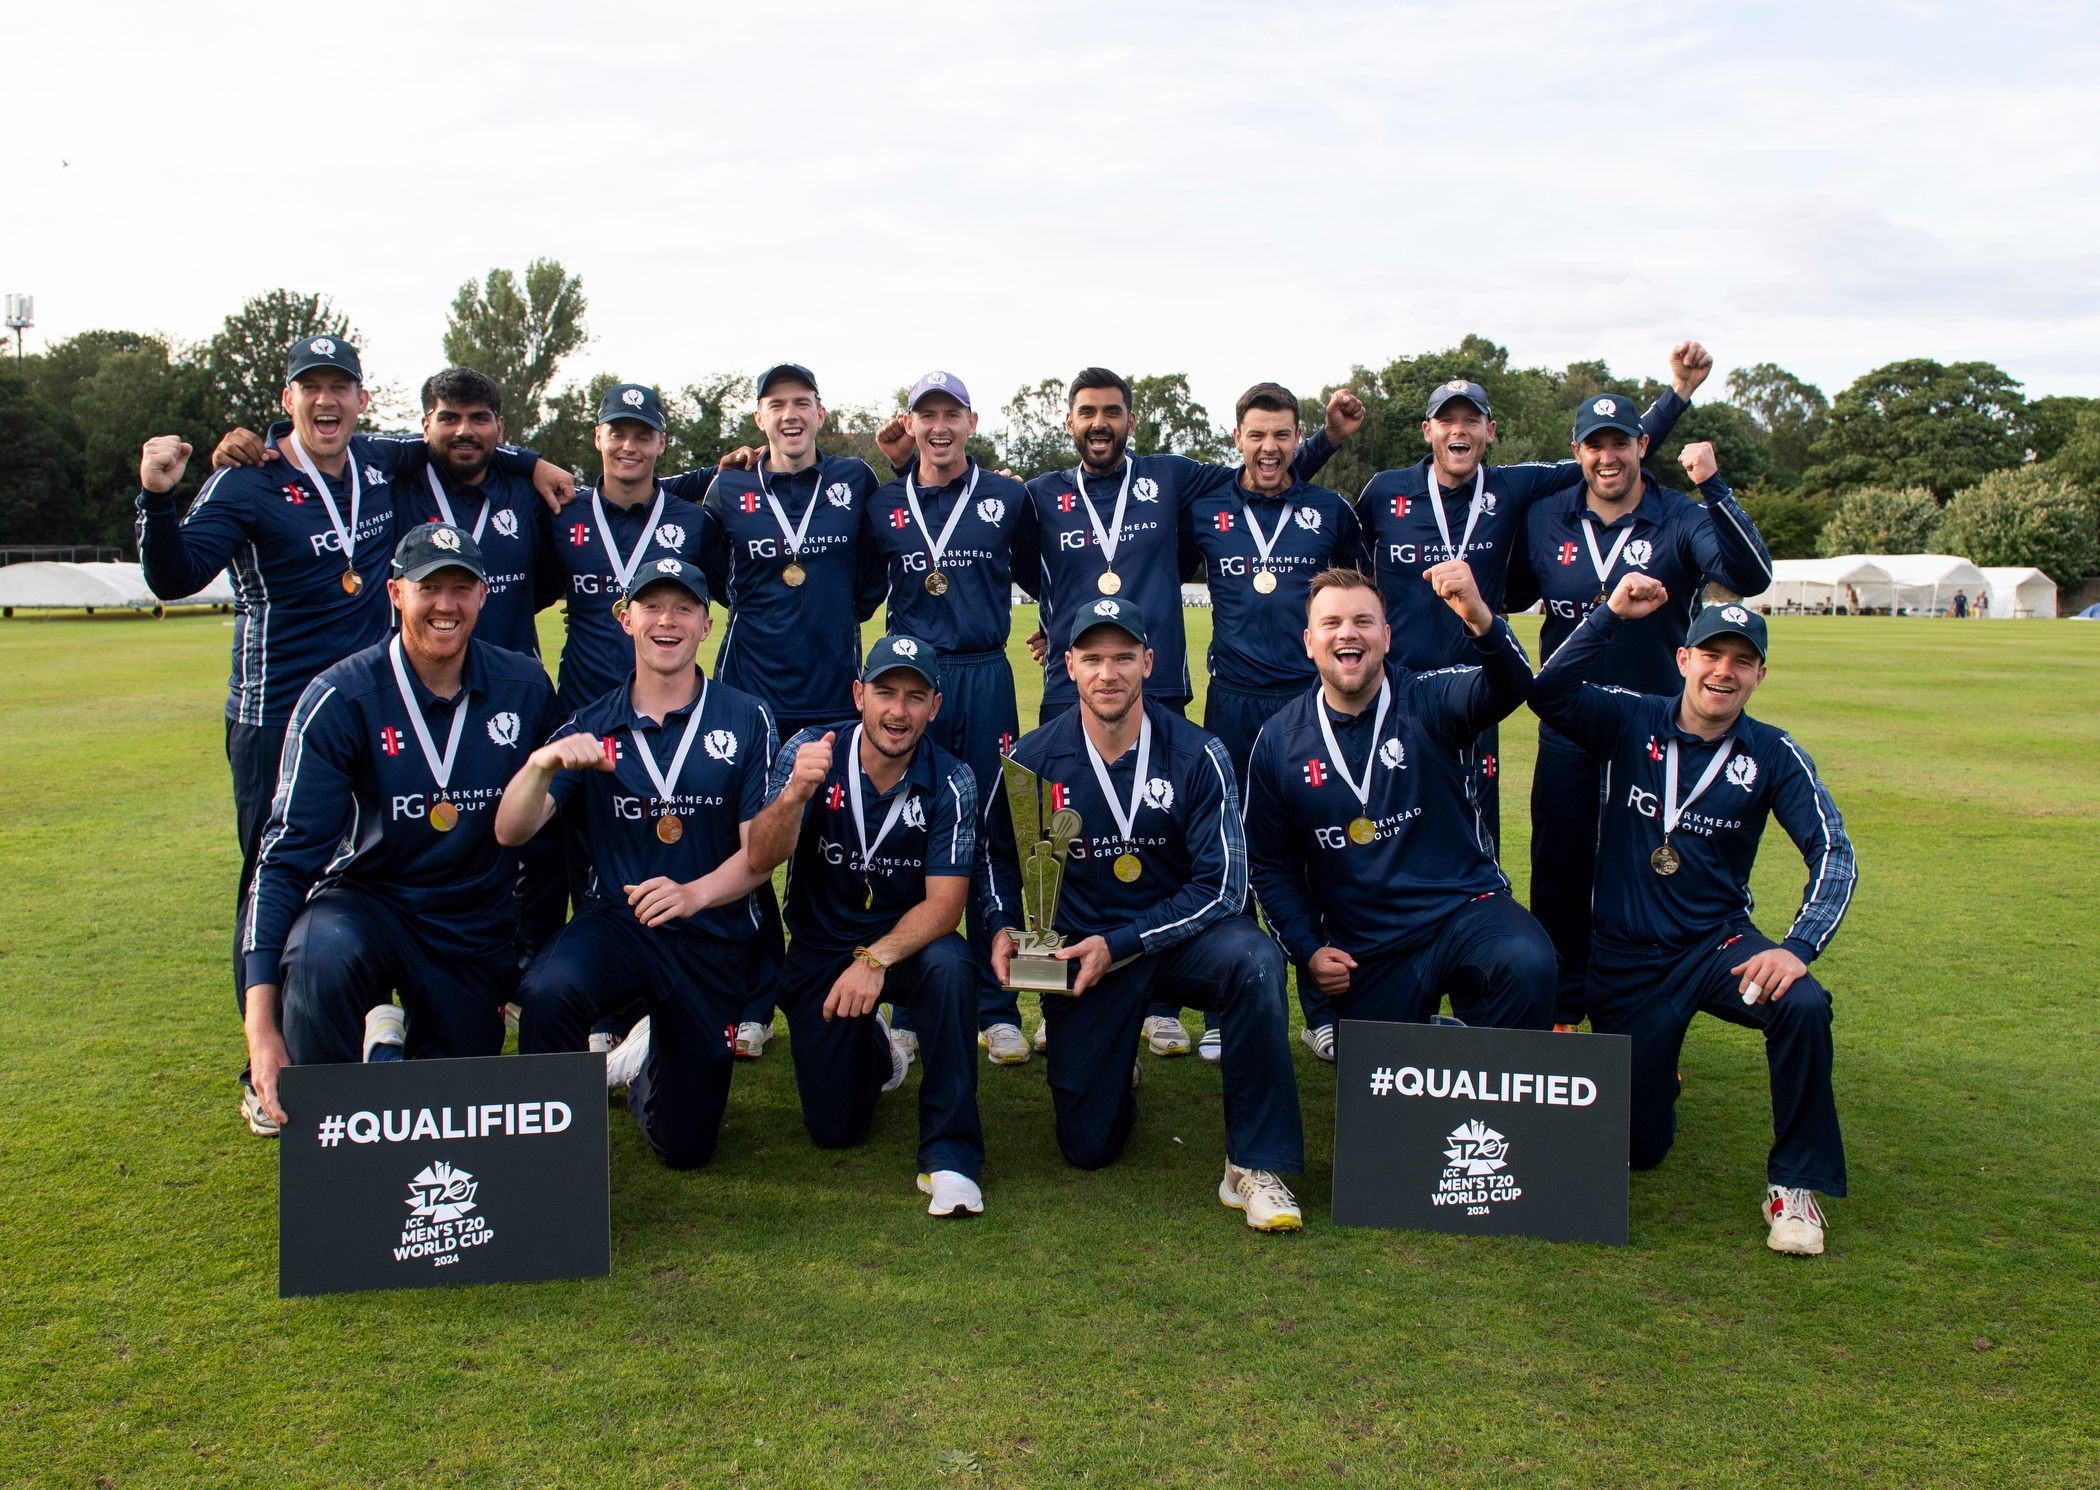 SCOTS TO FACE ENGLAND AND AUSTRALIA AT ICC MEN’S T20 WORLD CUP